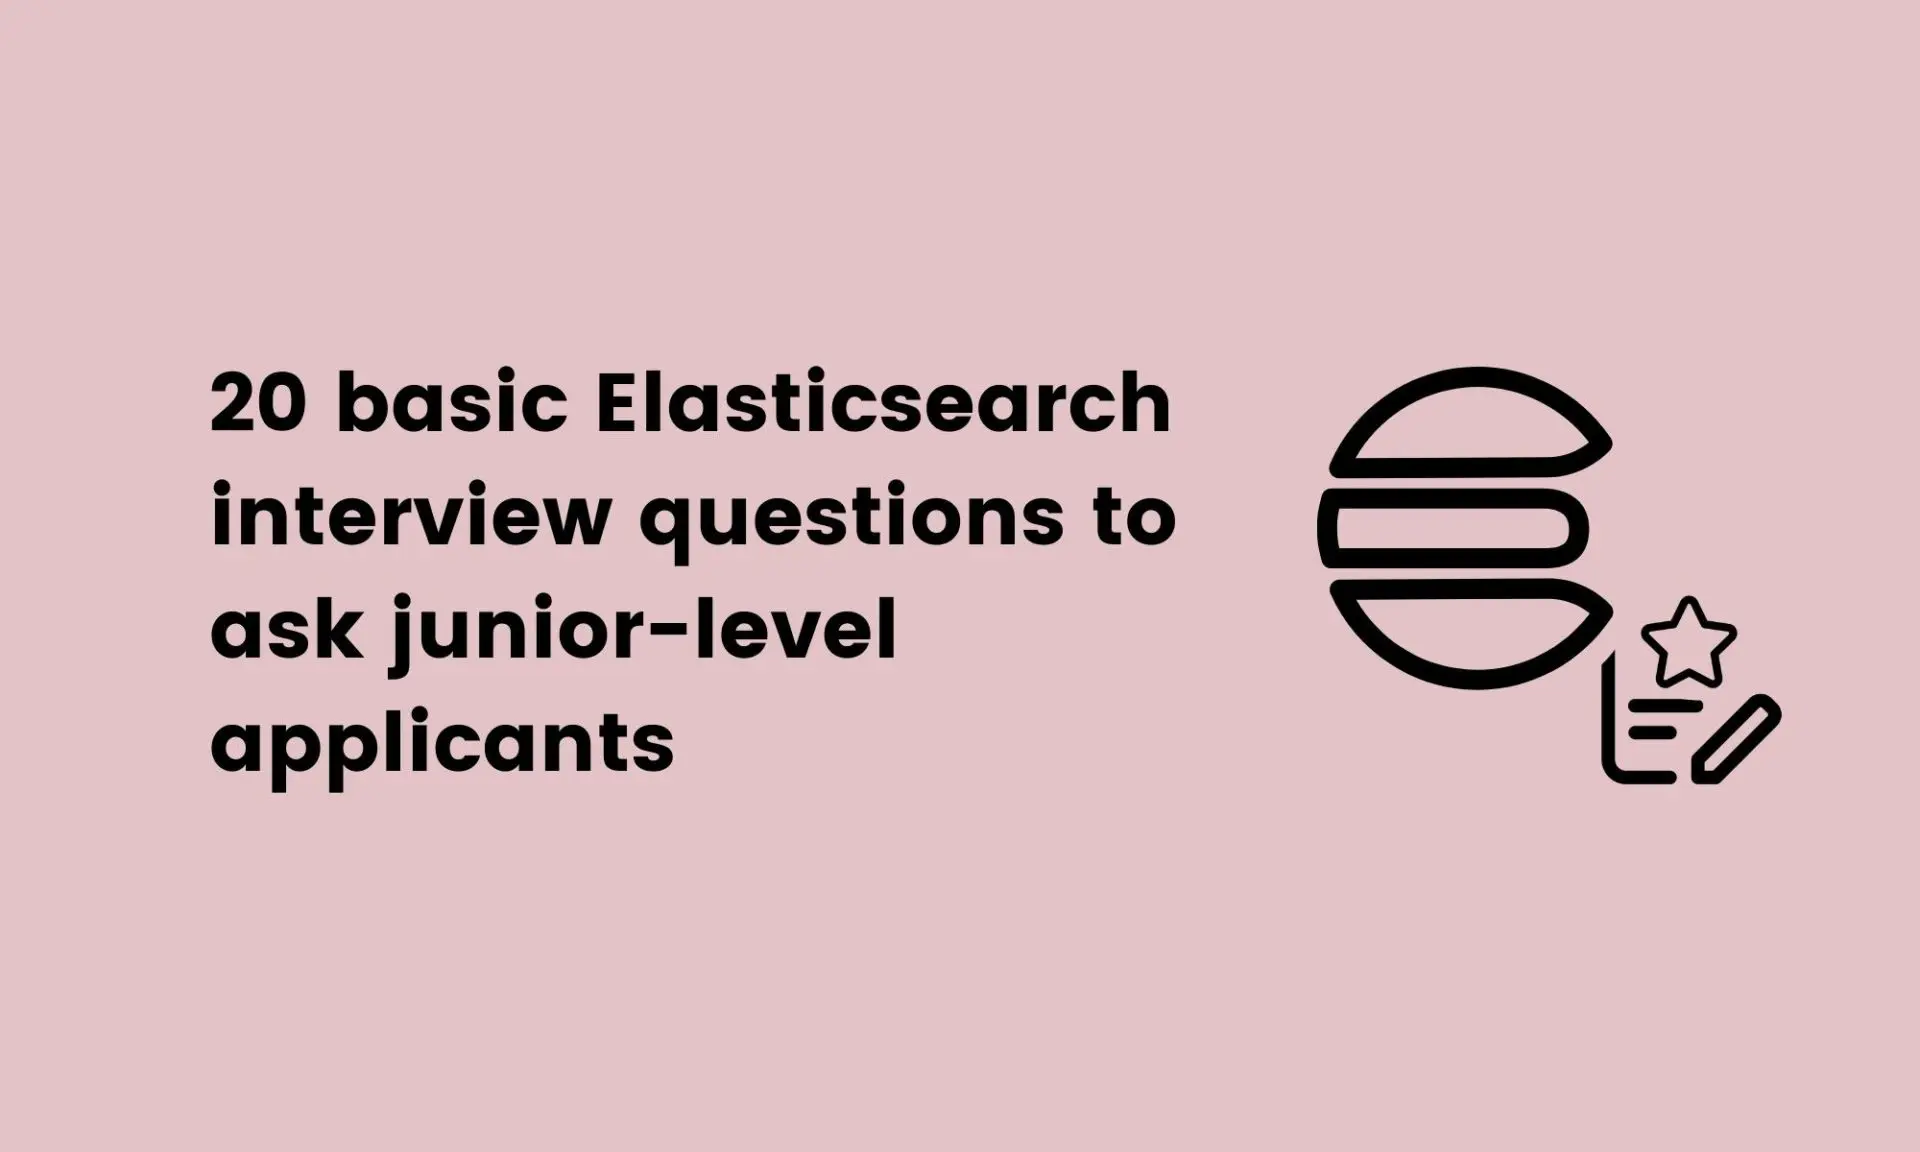 20 basic Elasticsearch interview questions to ask junior-level applicants